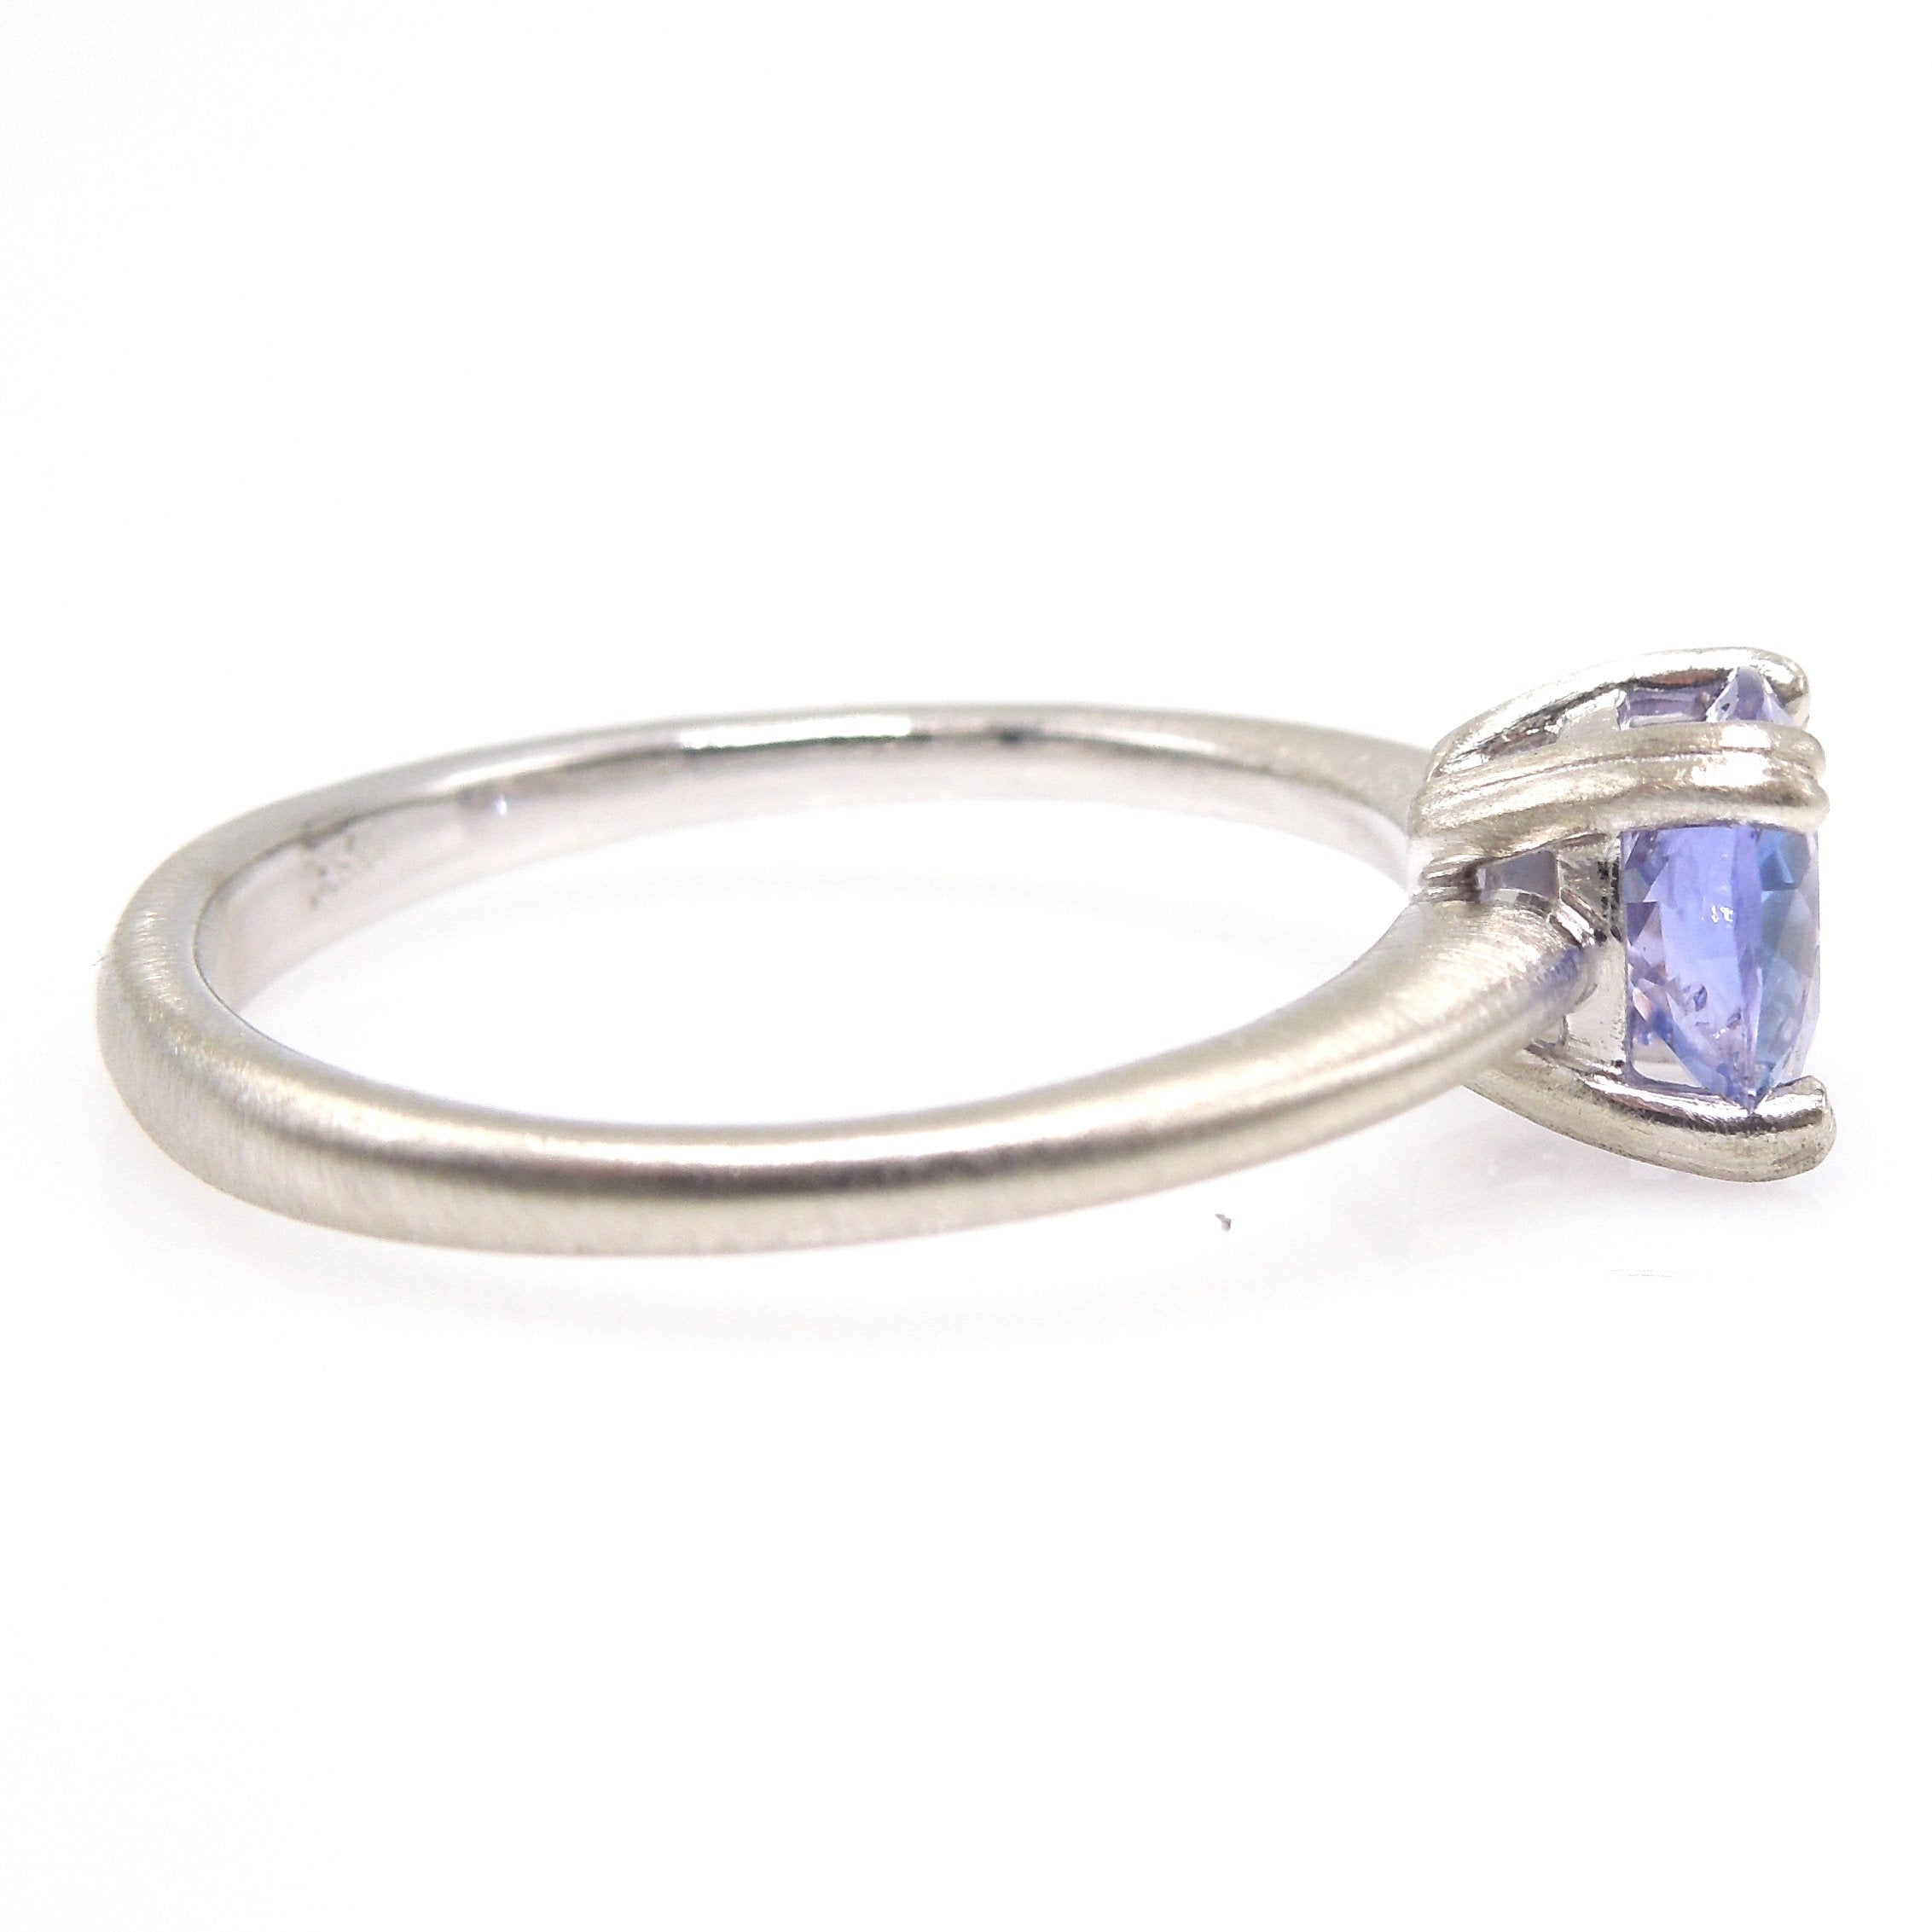 1.21ct Cushion Cut Natural Purple Sapphire Solitaire - Brushed 14K White Gold